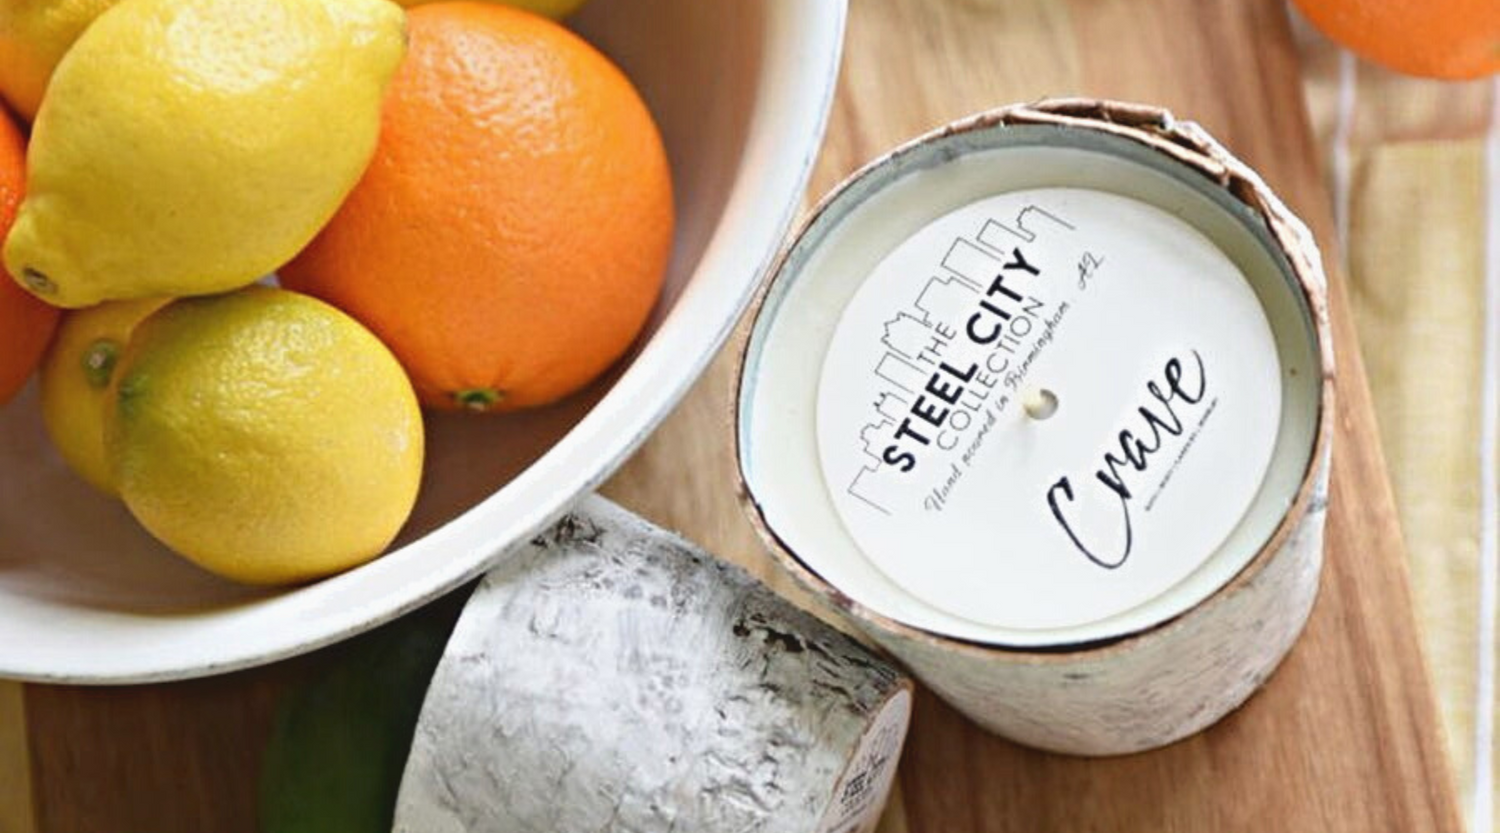 a steel city collection crave candle next to a bowl of oranges